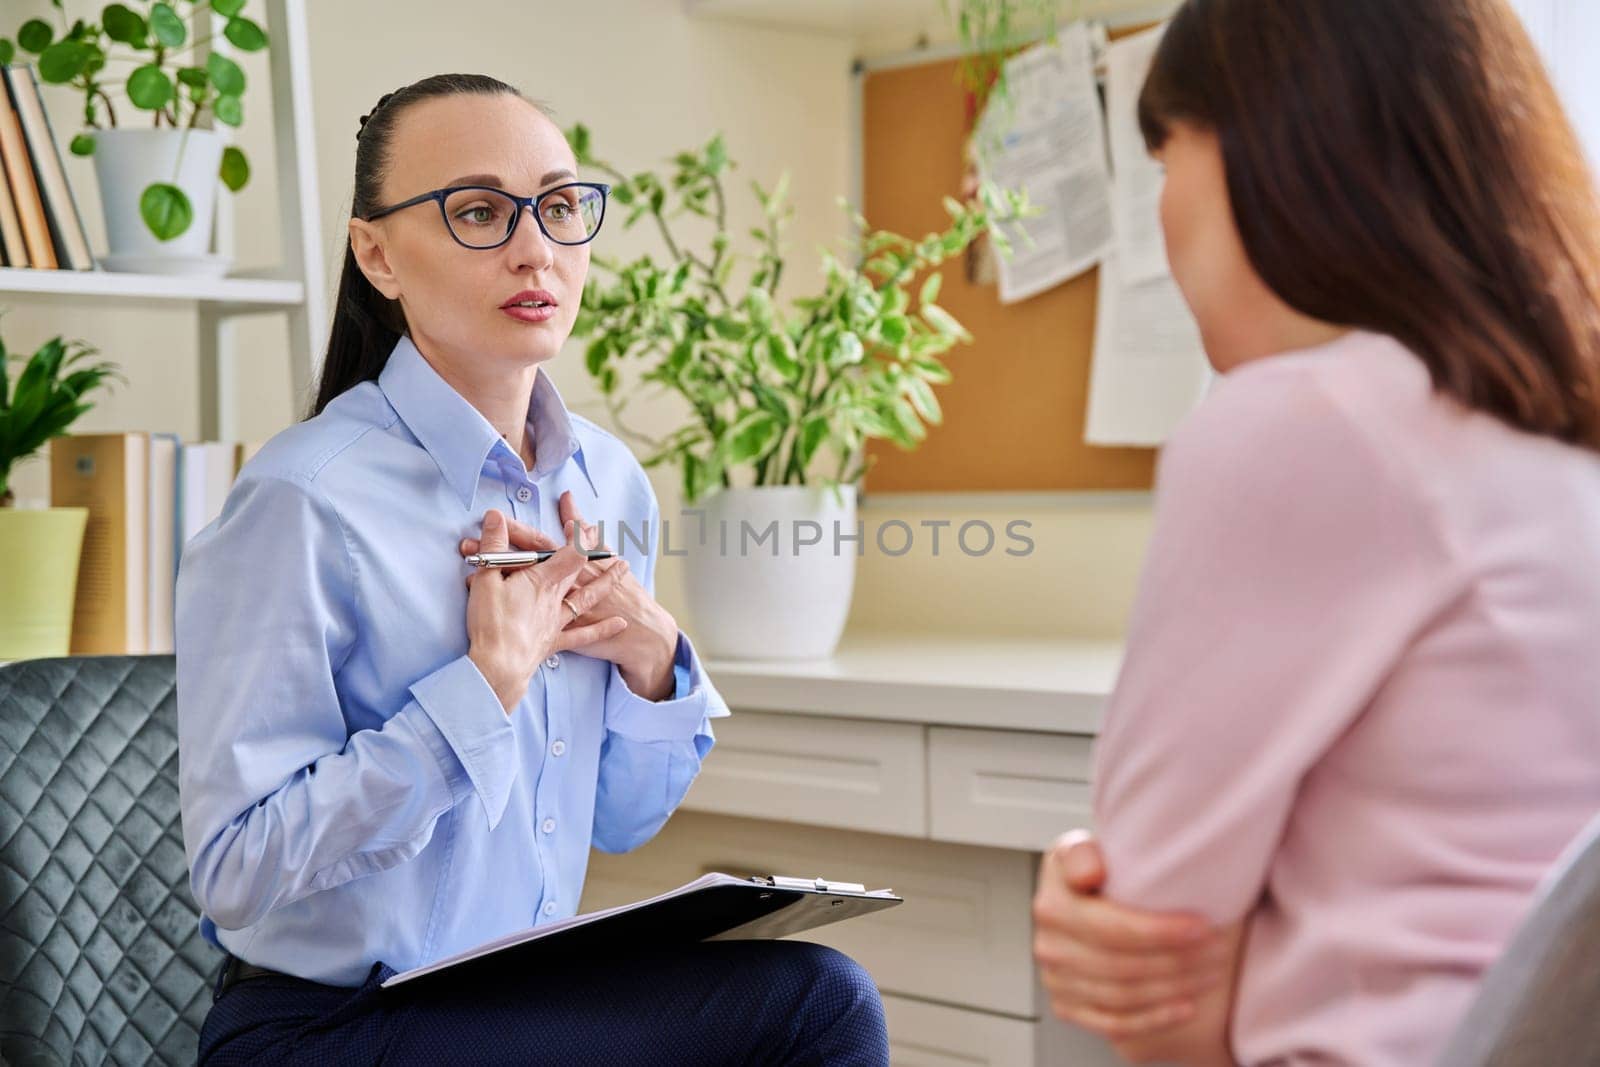 Professional mental psychologist counselor at therapy session with female patient. Talking women sitting in office, psychology, psychotherapy, counseling, health care, support help treatment concept